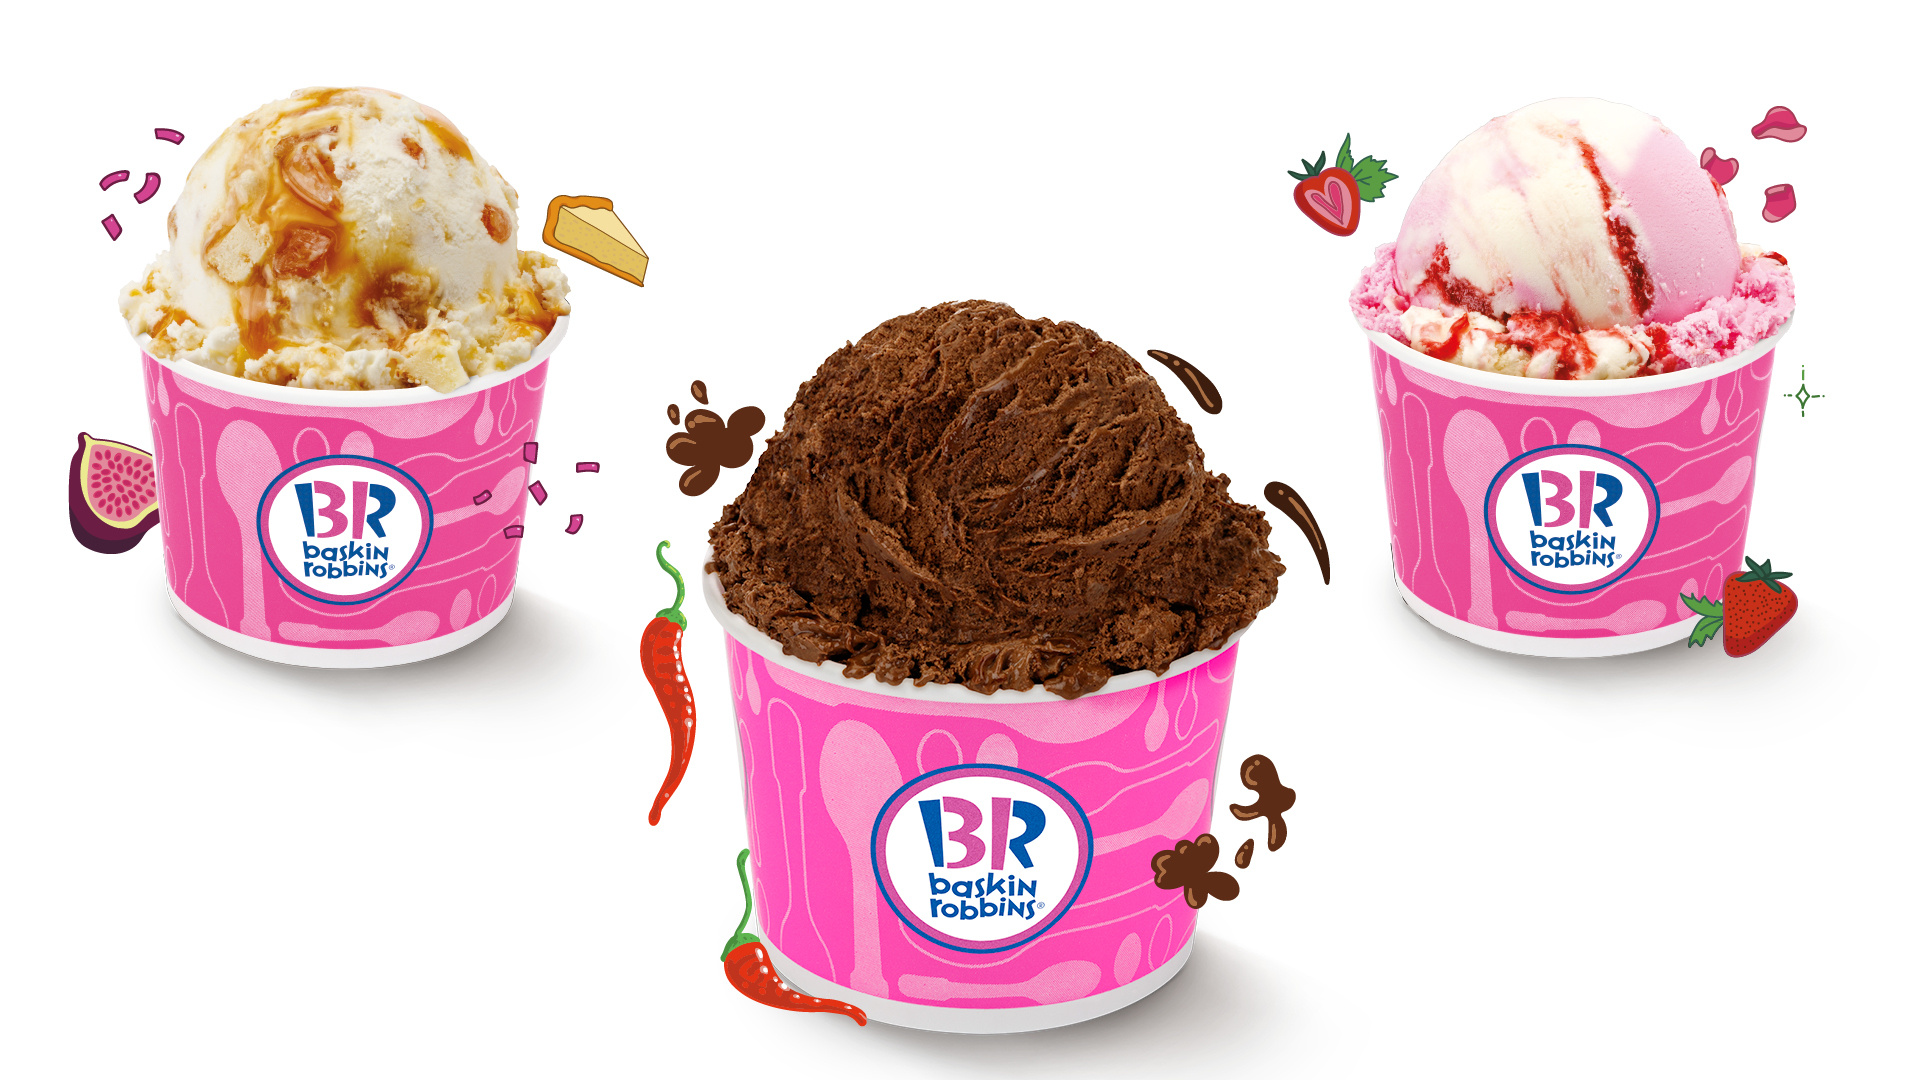 Baskin Robbins: The company is known for its "31 flavors" slogan, Glendale, California. 1920x1080 Full HD Background.